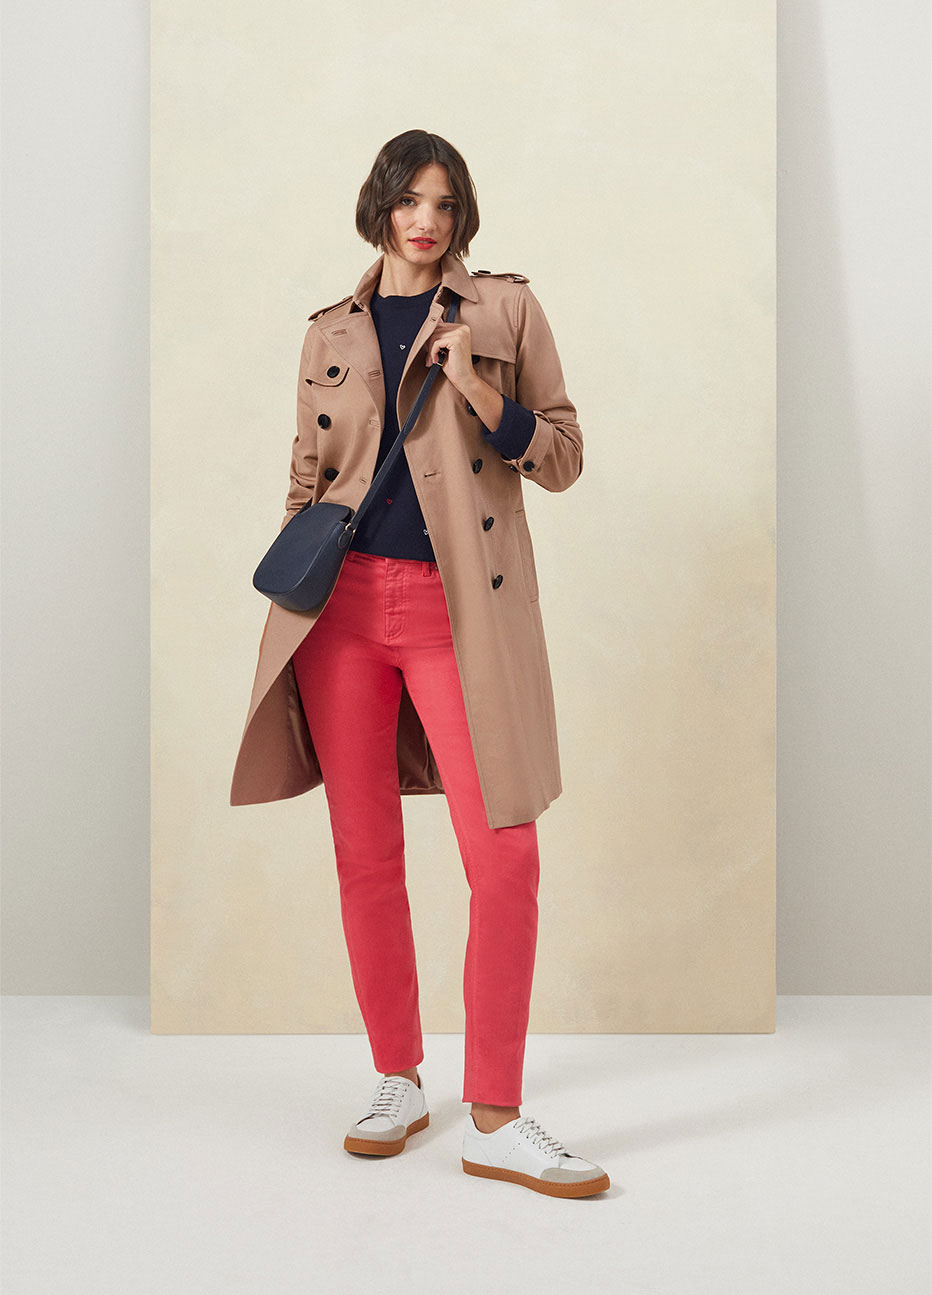 Model photographed against a yellow backdrop wearing a Hobbs trench coat, navy jumper and coral pink jeans.